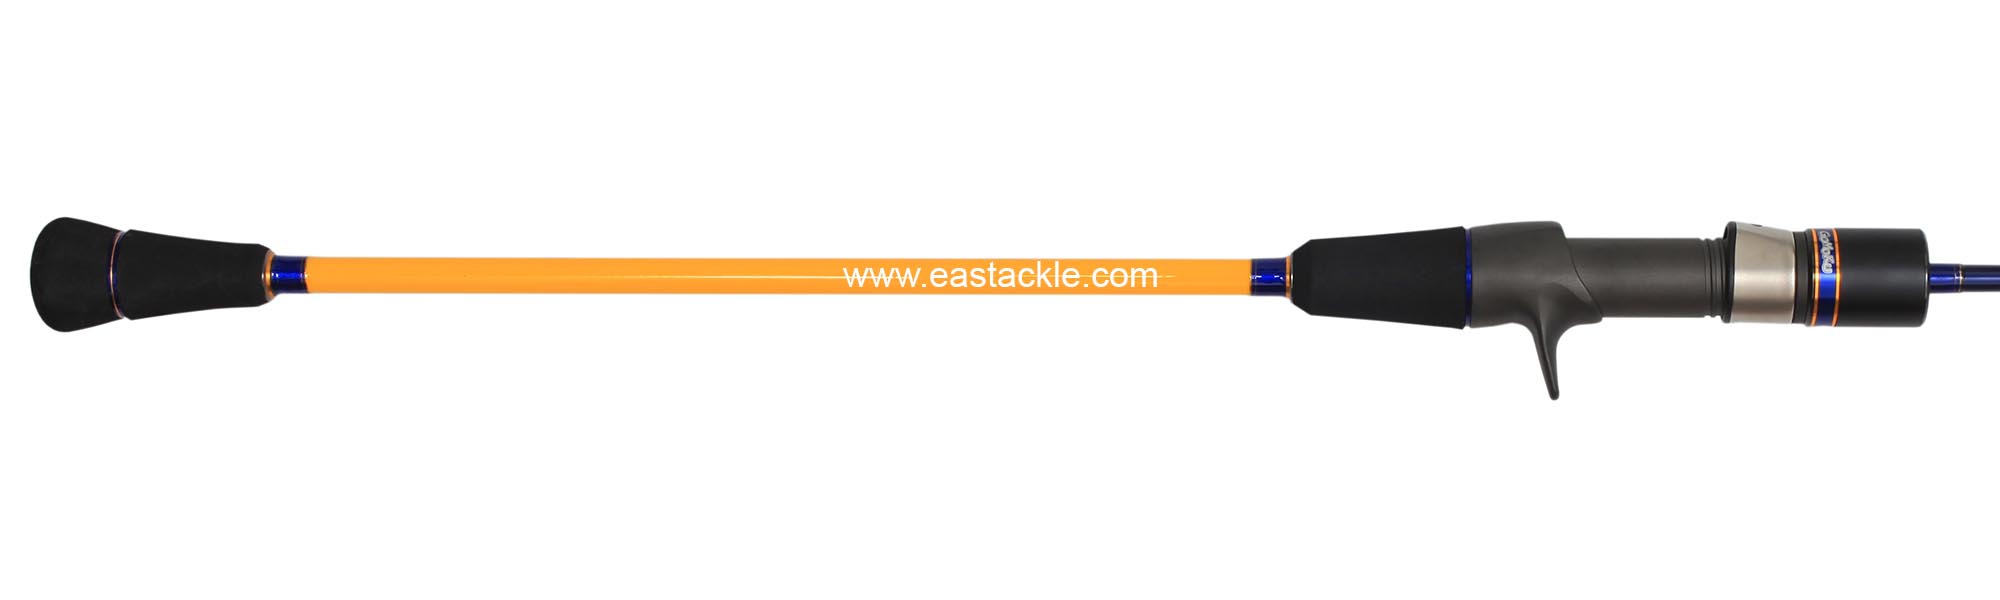 Storm - Gomoku Slo4 Evolution - SFV631-3 - Overhead Slow Fall Jigging Rod - Butt to Fore Grip Section (Side View)